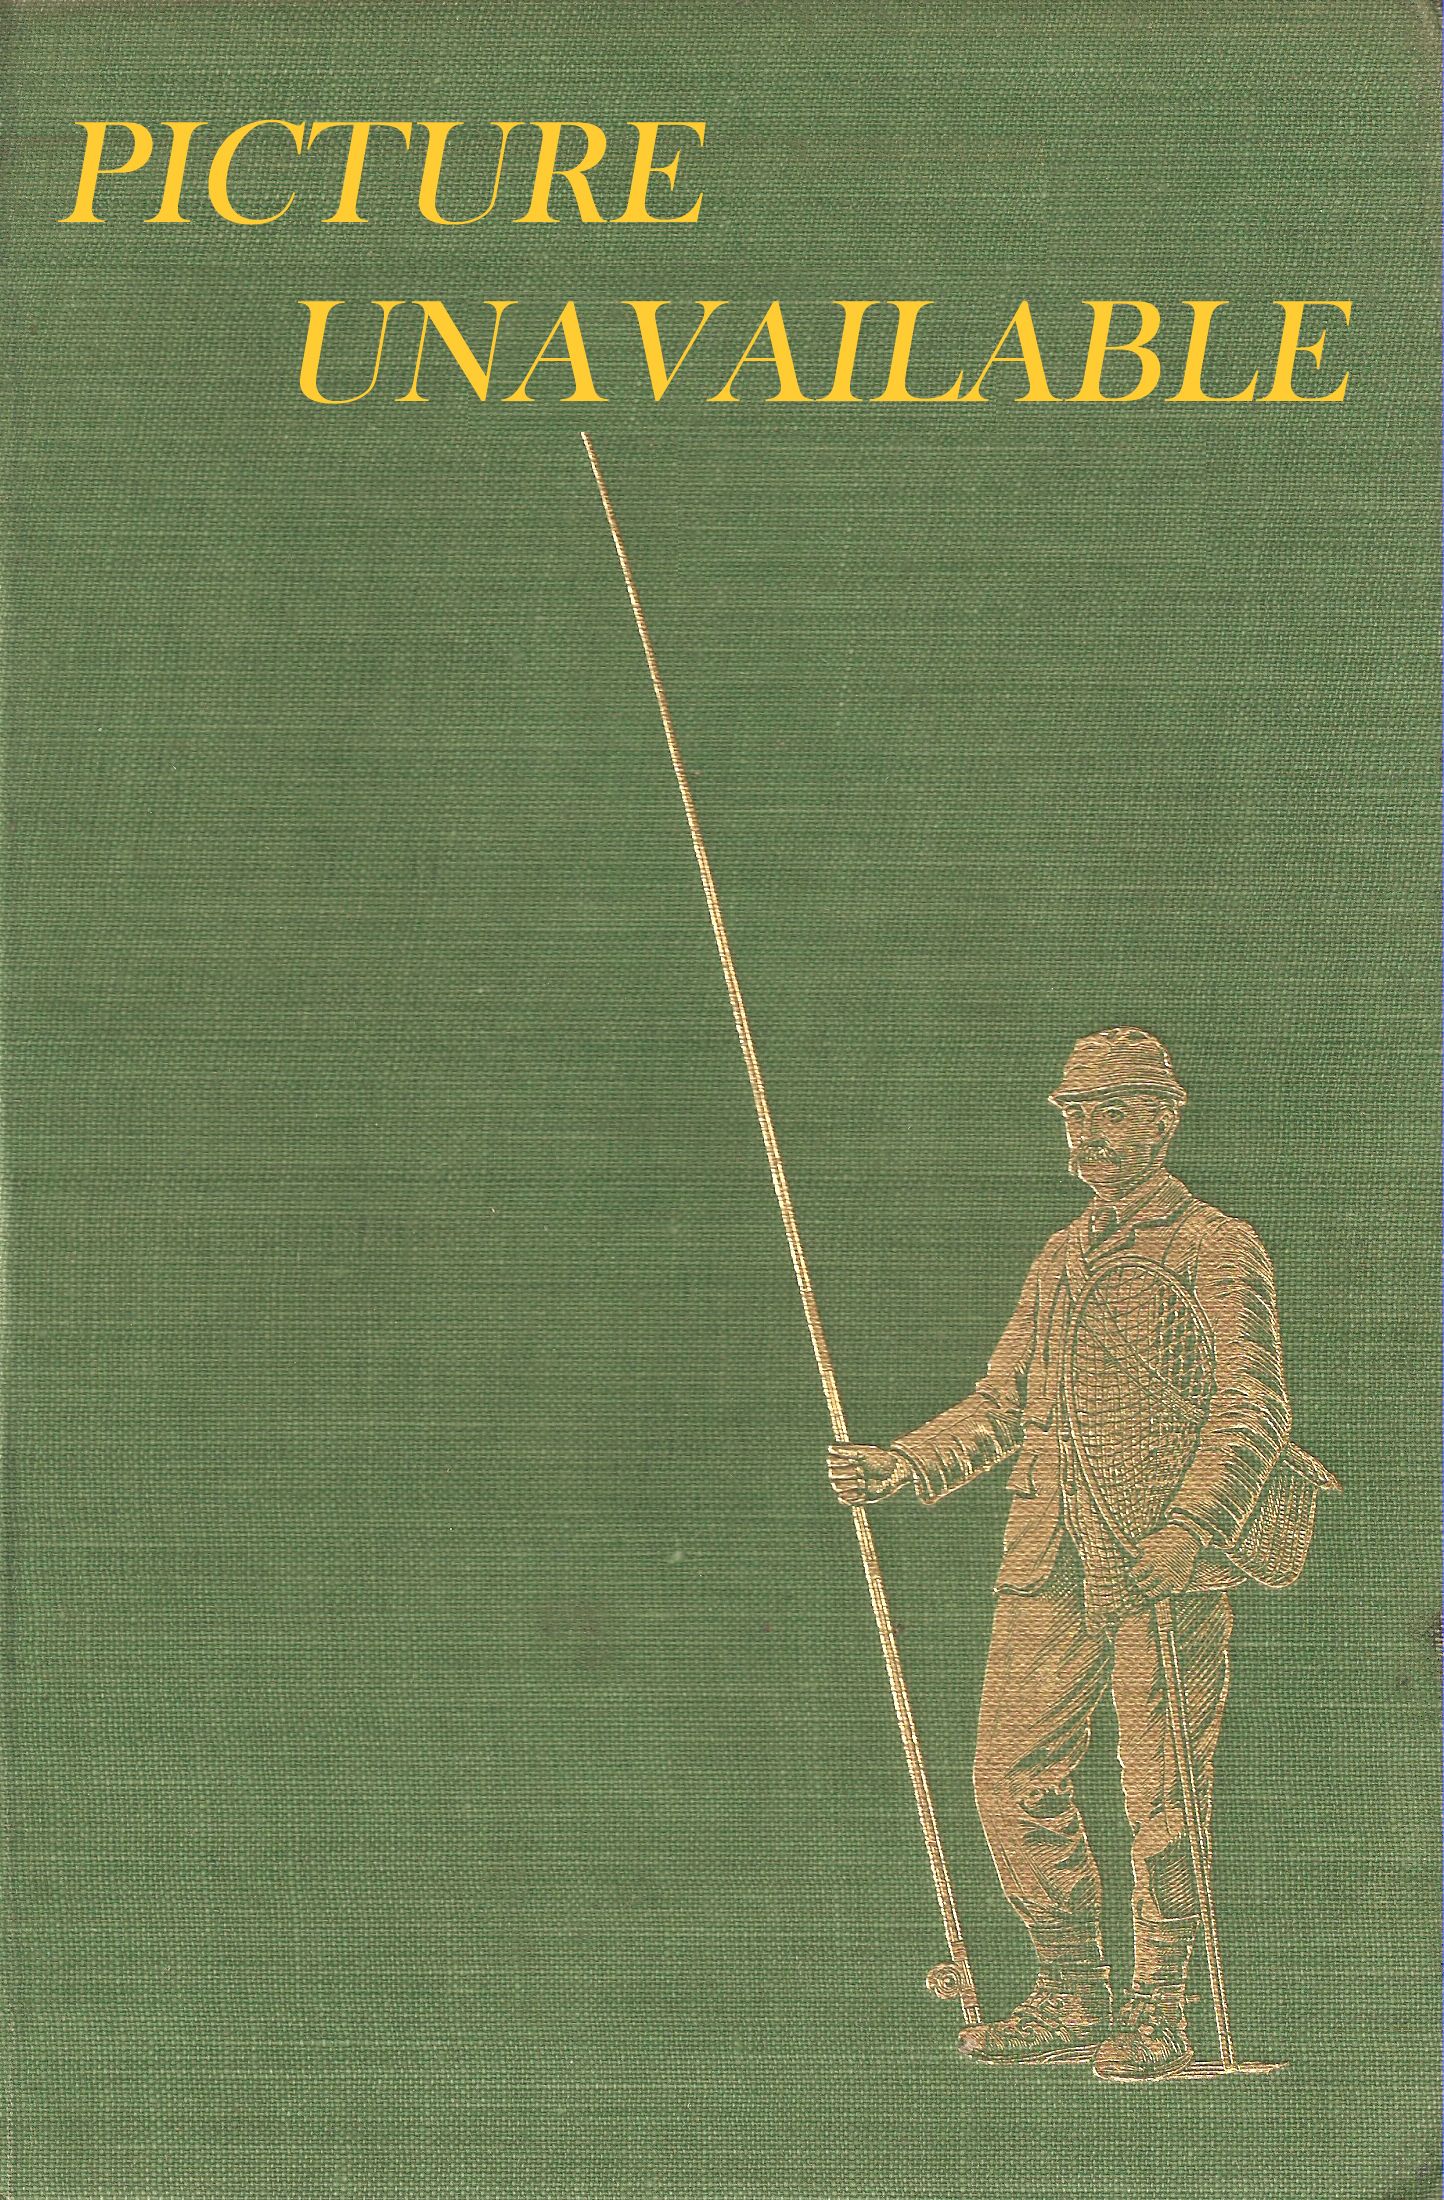 THE SCOTTISH ANGLER: SCOTLAND'S ONLY ANGLING MAGAZINE. Volume One 1948 -  1949.